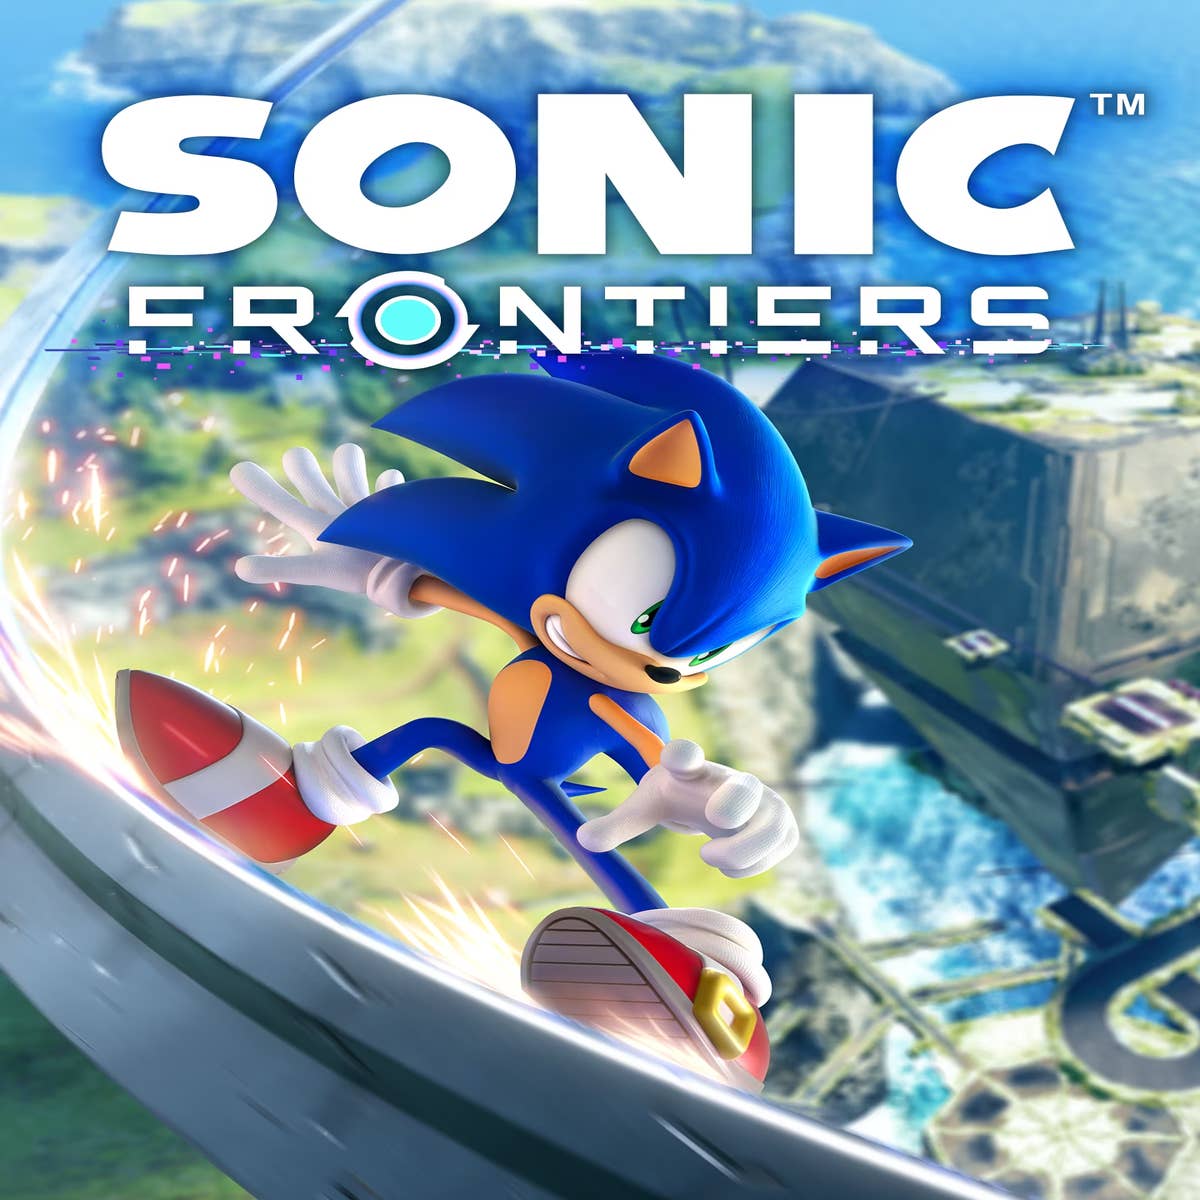 I pity anyone playing Sonic Frontiers on Nintendo Switch